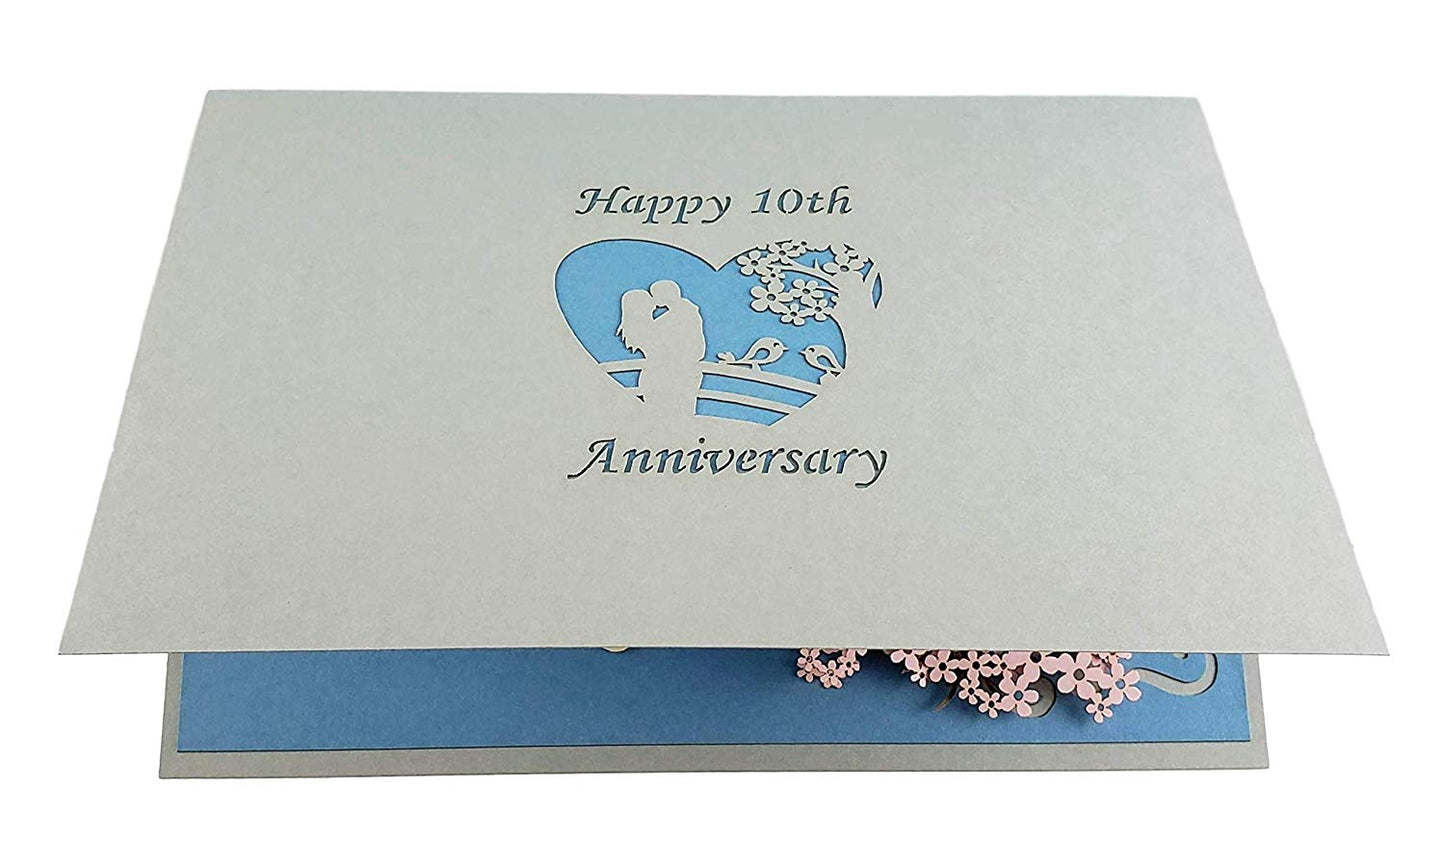 Happy 10th Anniversary 3D Pop Up Greeting Card - 10th Wedding Anniversary - Anniversary - Love - Wed - iGifts And Cards